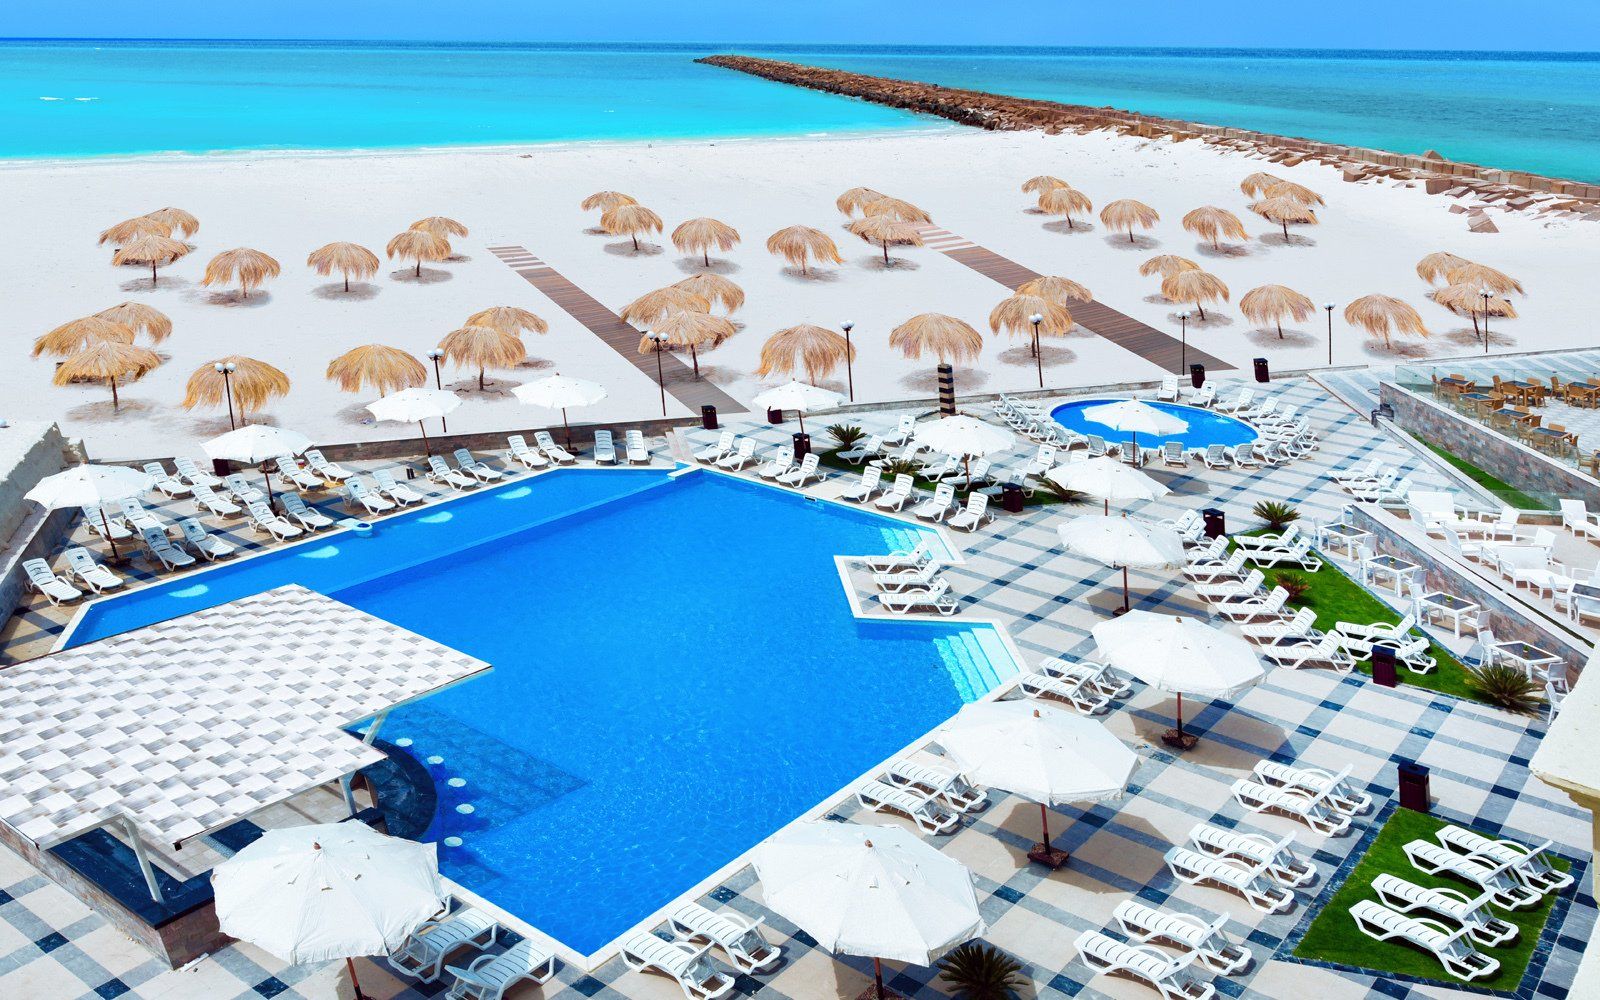 book now hotelux La playa Alamein resort online and make joyous memories for a lifetime.